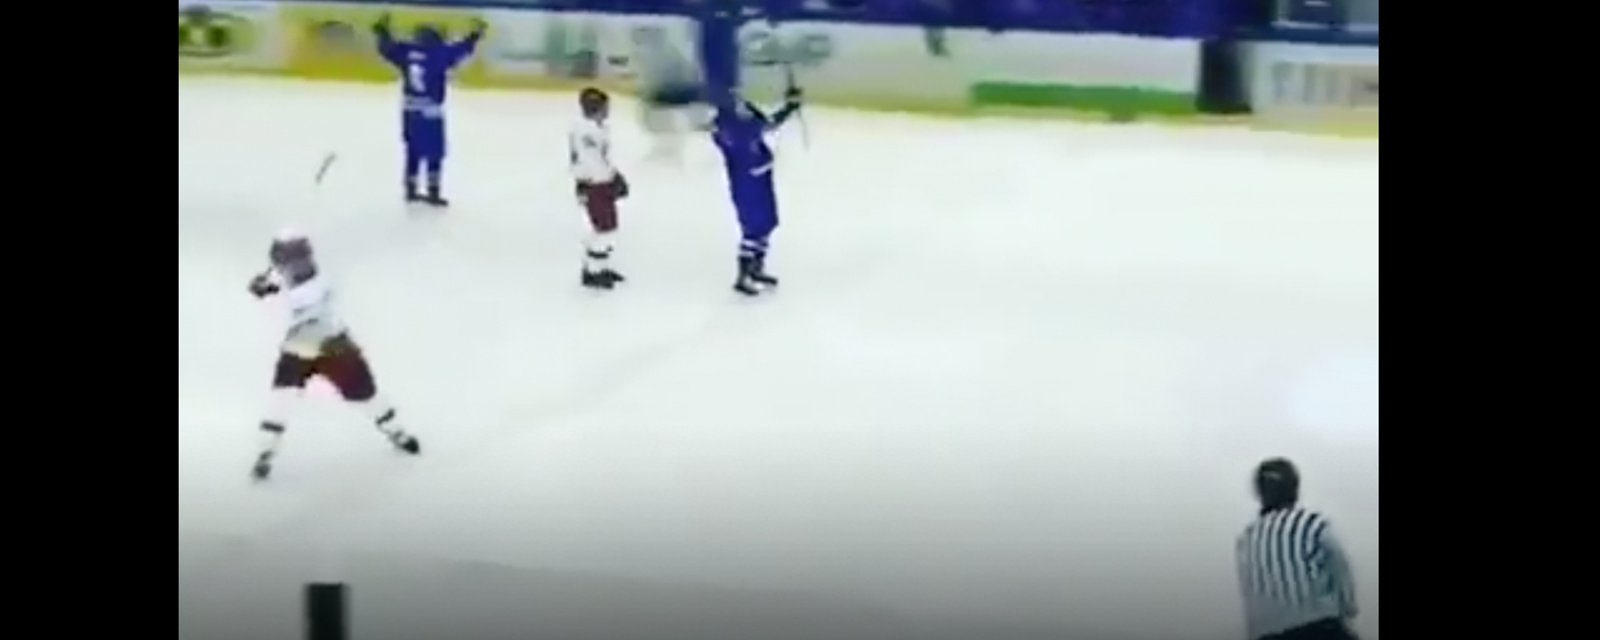 MUST SEE: Hockey player whips stick at ref in utter frustration!